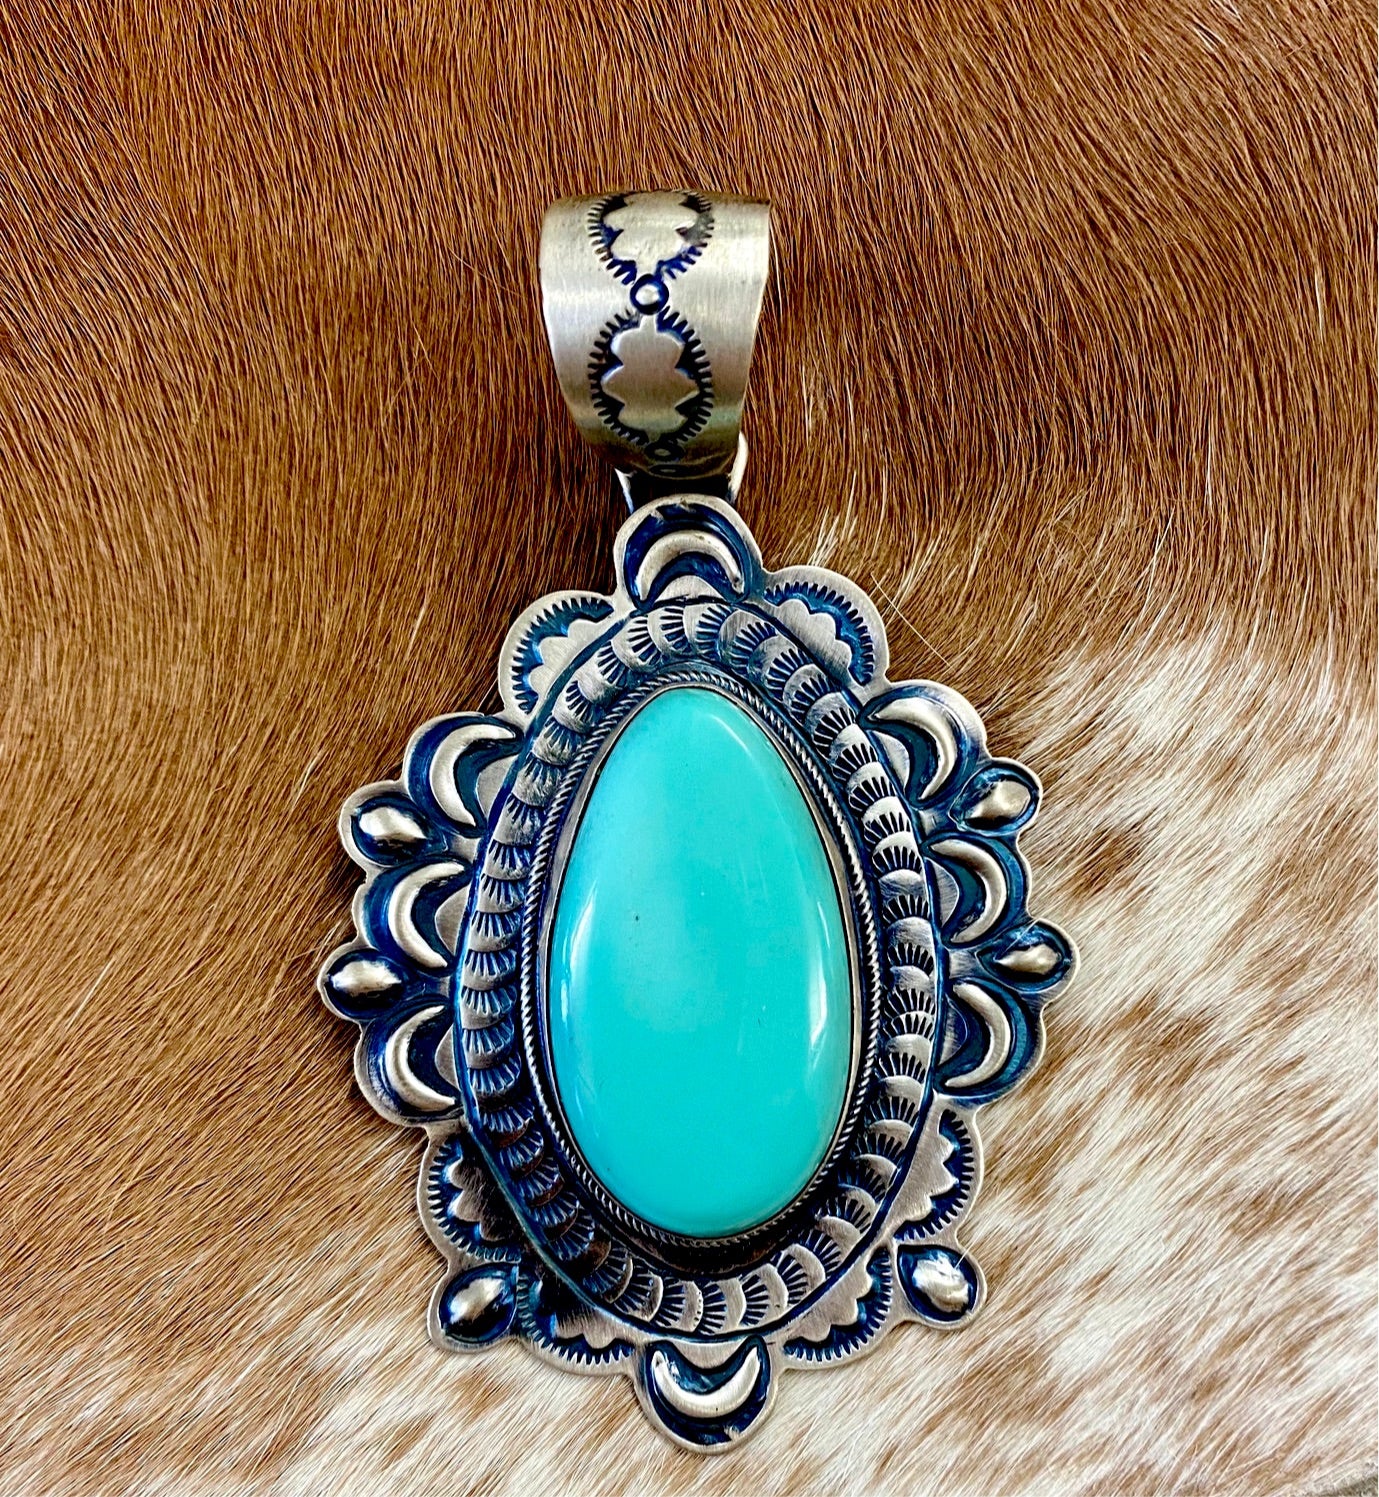 The BRD Turquoise Pendant - Ny Texas Style Boutique Stamped sterling and signed BRD by Navajo Native American artist and silversmith Raymond Beard single large oval shape turquoise sterling silver stone pendant.